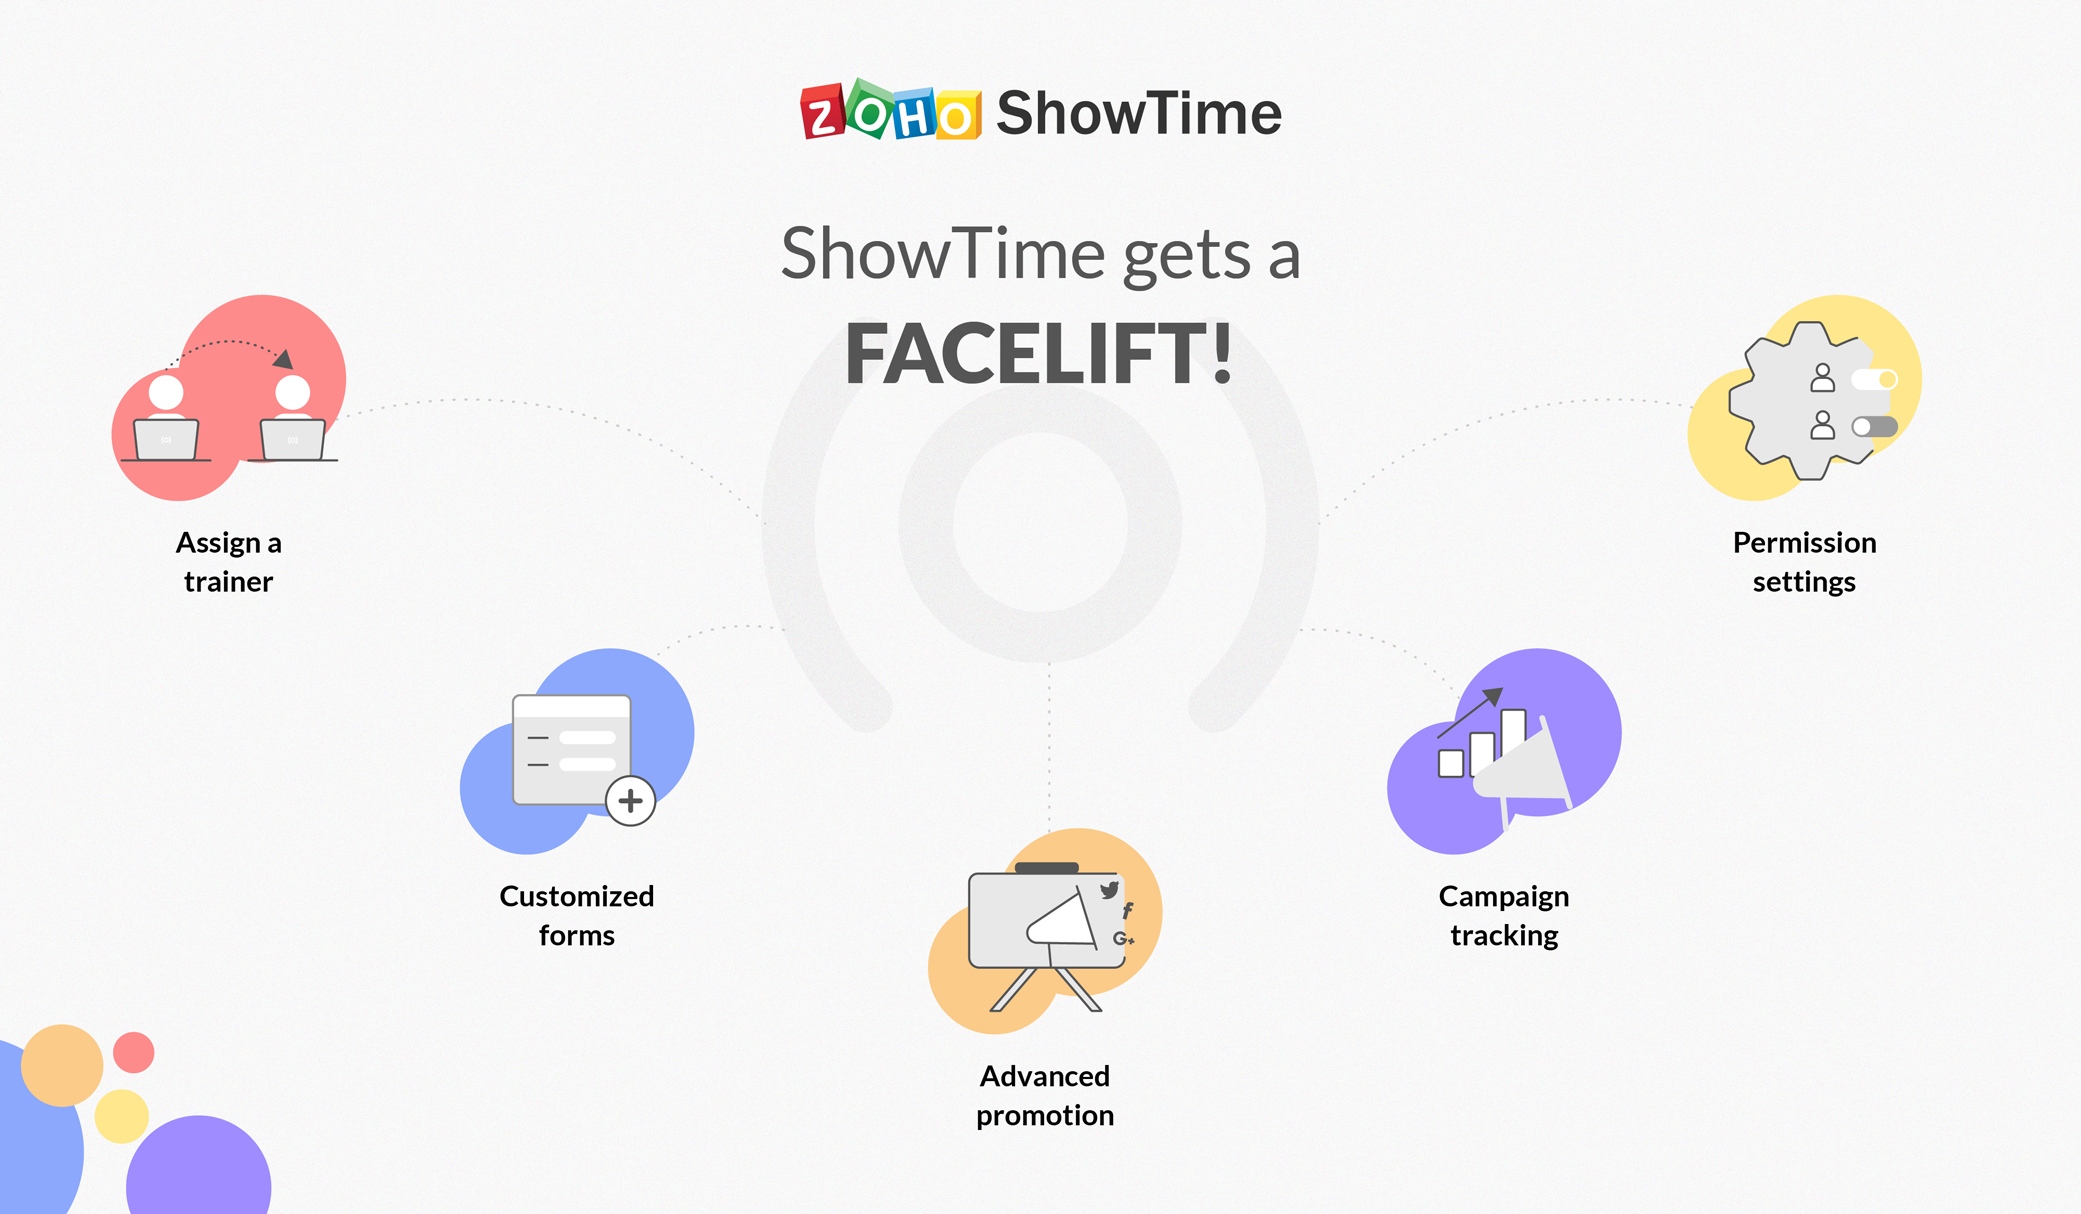 Here are 5 new features that will make your ShowTime experience better